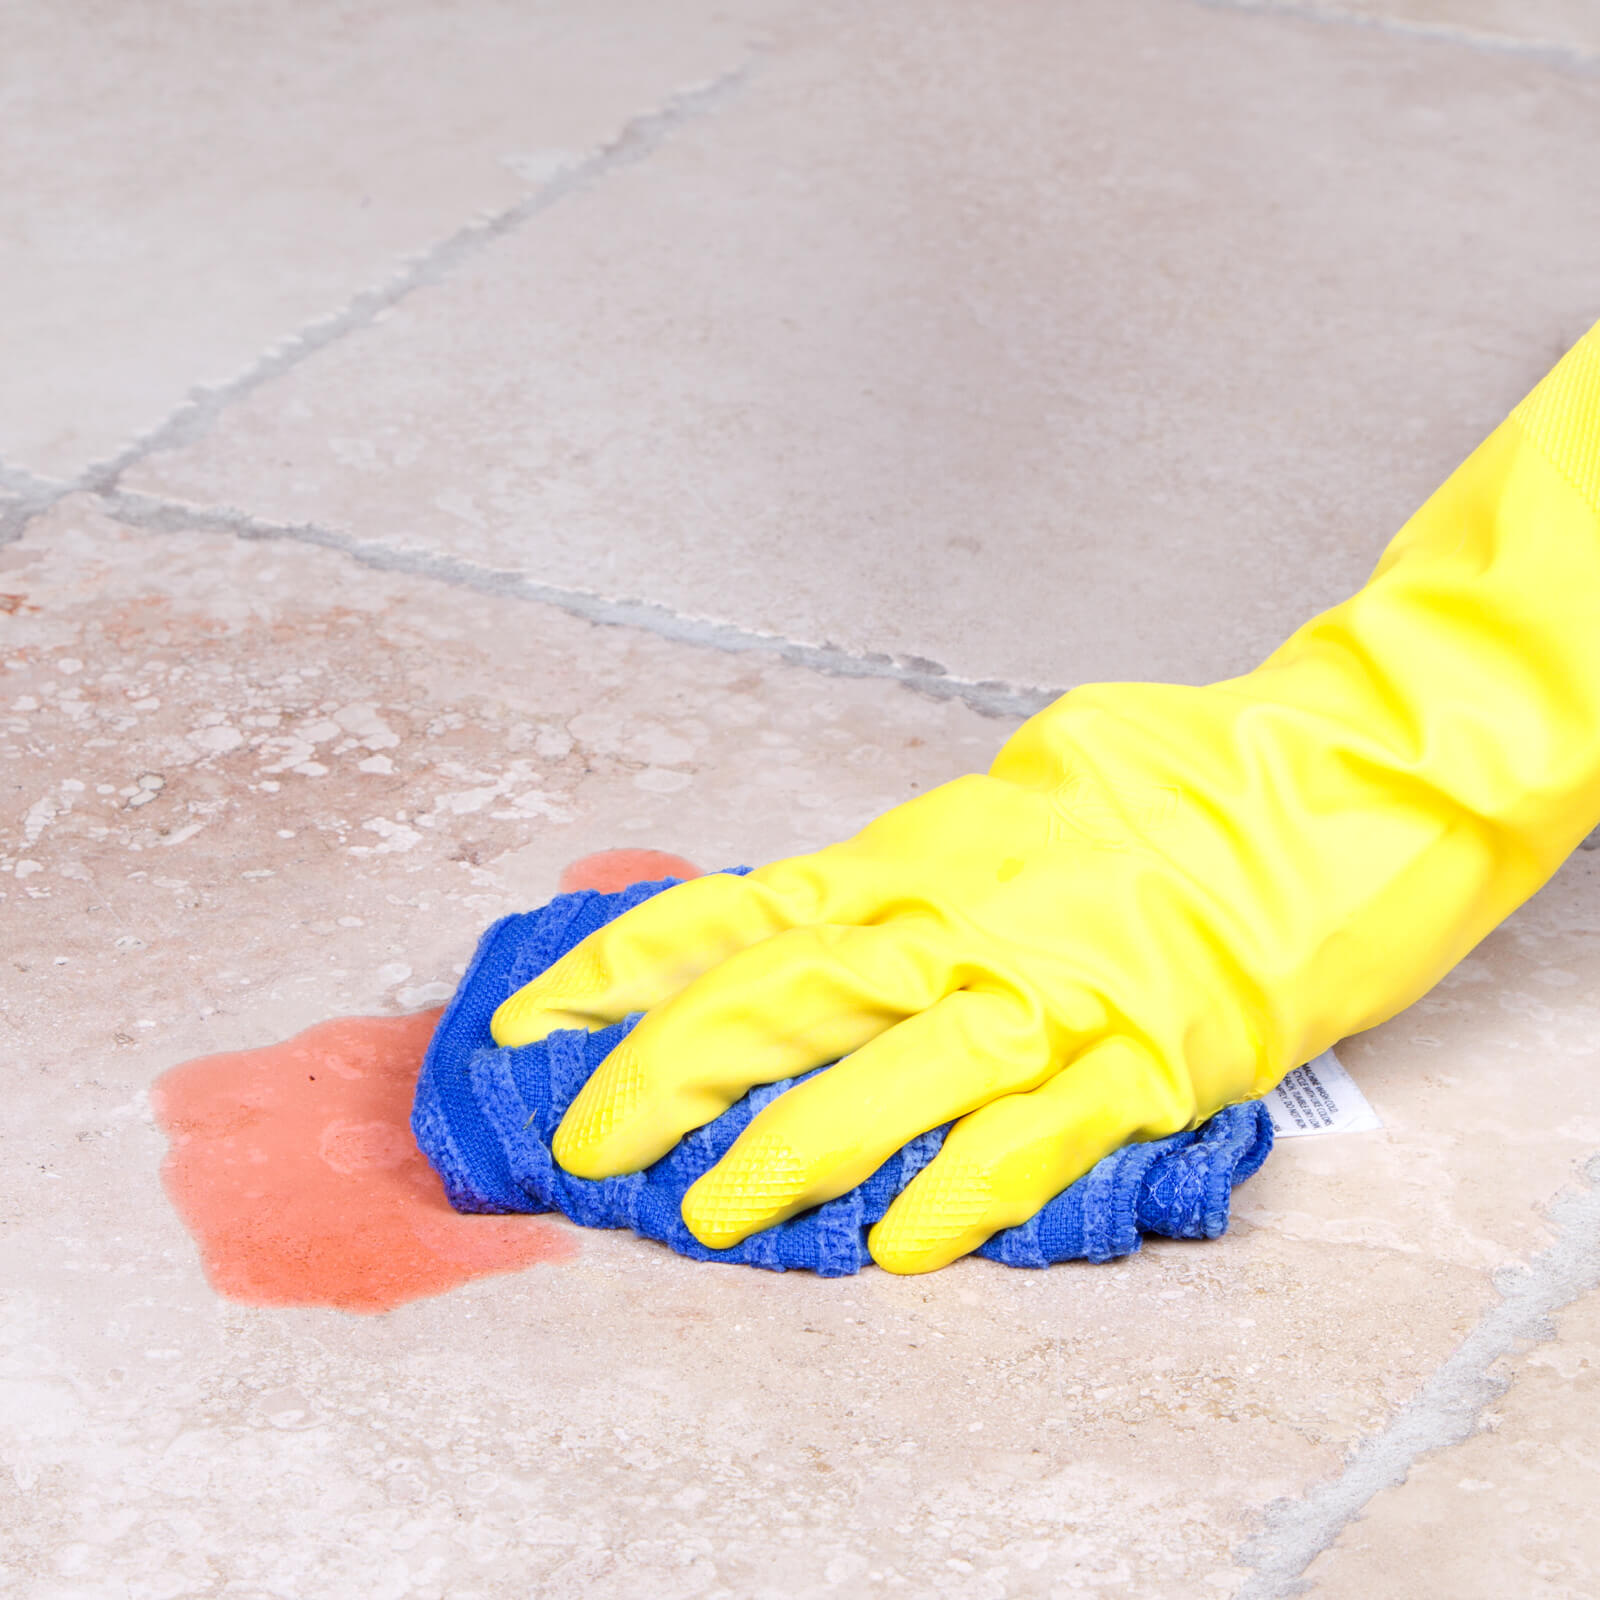 Tile cleaning | The Flooring Center